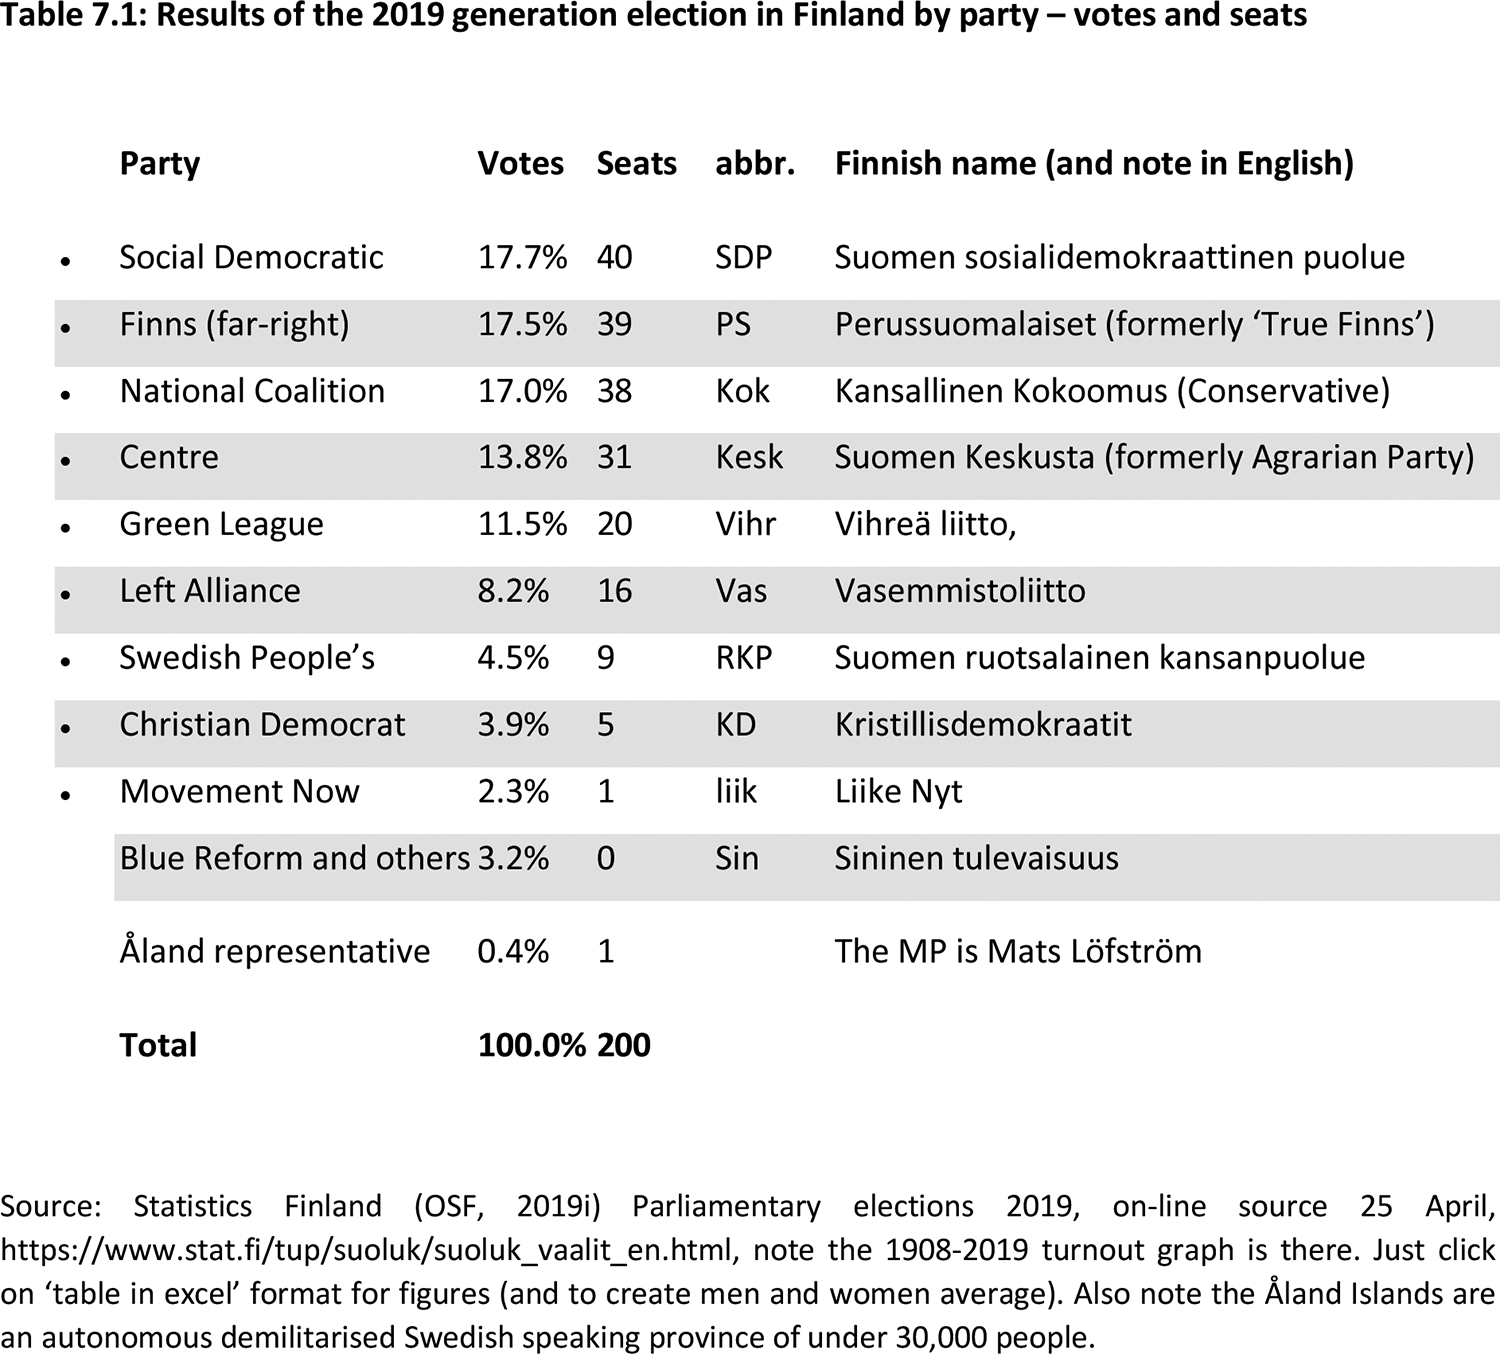 Table 7.1: Source: Statistics Finland (OSF, 2019i) Parliamentary elections 2019, on-line source 25 April, https://www.stat.fi/tup/suoluk/suoluk_vaalit_en.html, note the 1908-2019 turnout graph is there. Just click on ‘table in excel’ format for figures (and to create men and women average). Also note the Åland Islands are an autonomous demilitarised Swedish speaking province of under 30,000 people.